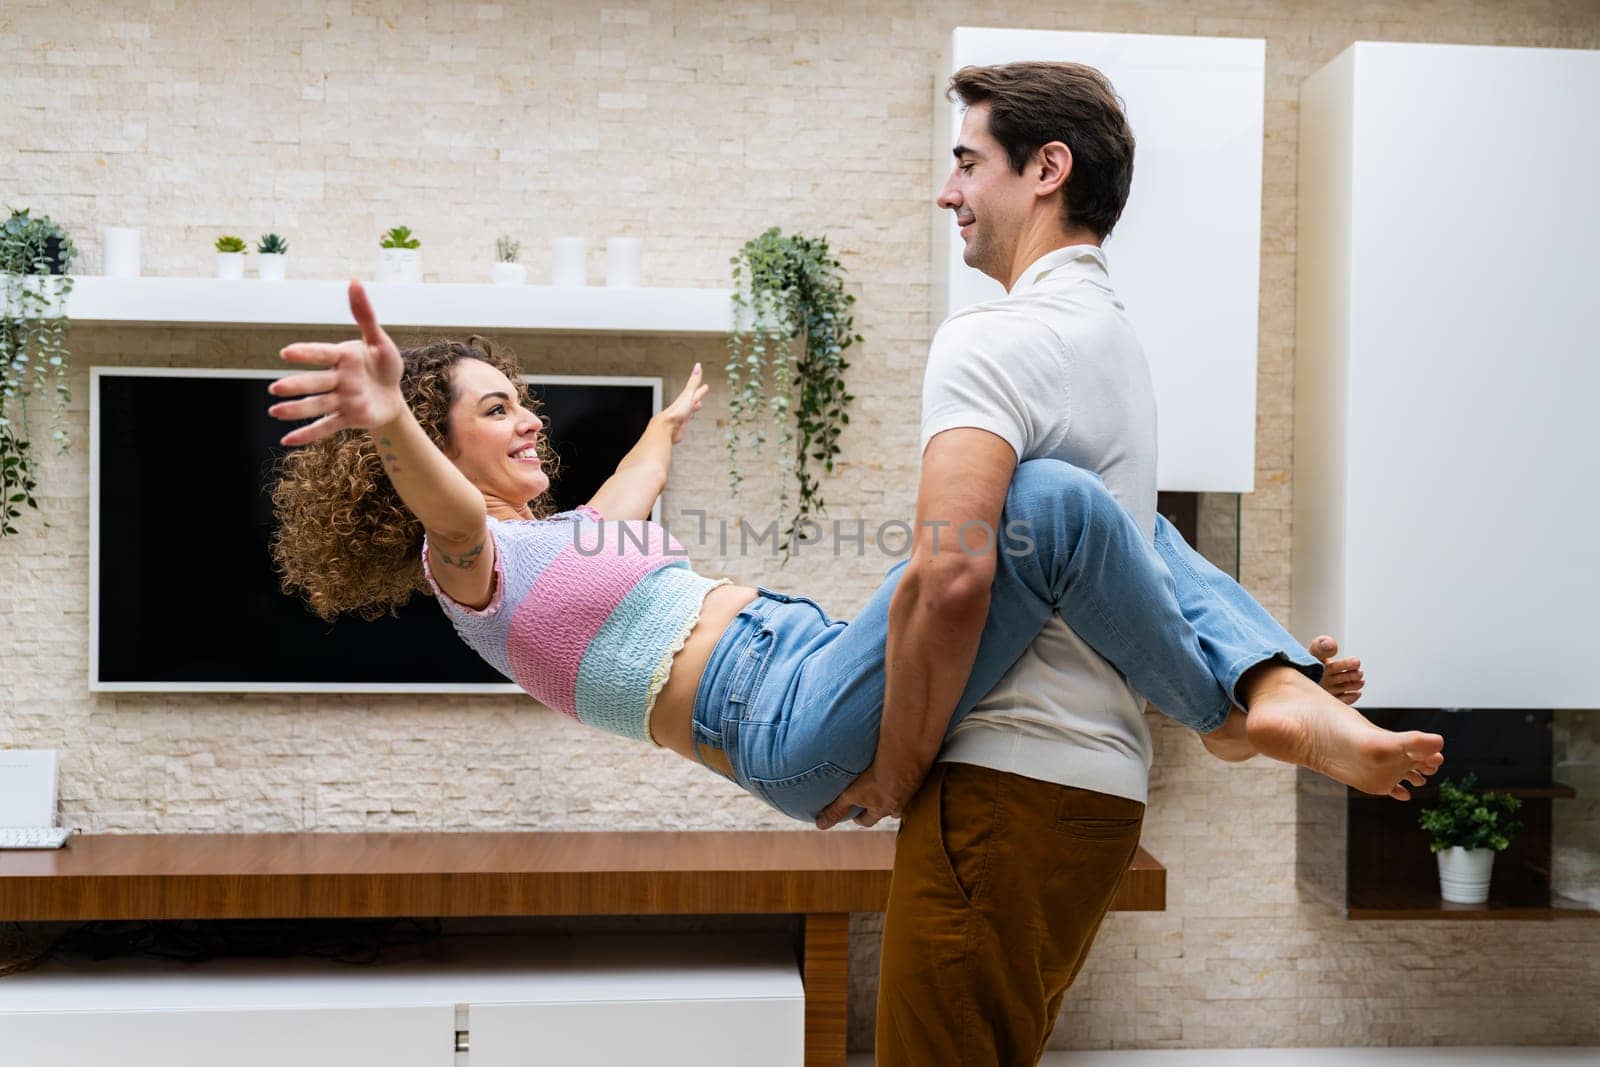 Side view of positive young couple having fun and enjoying time together while standing against led tv on wall with potted green plants at home